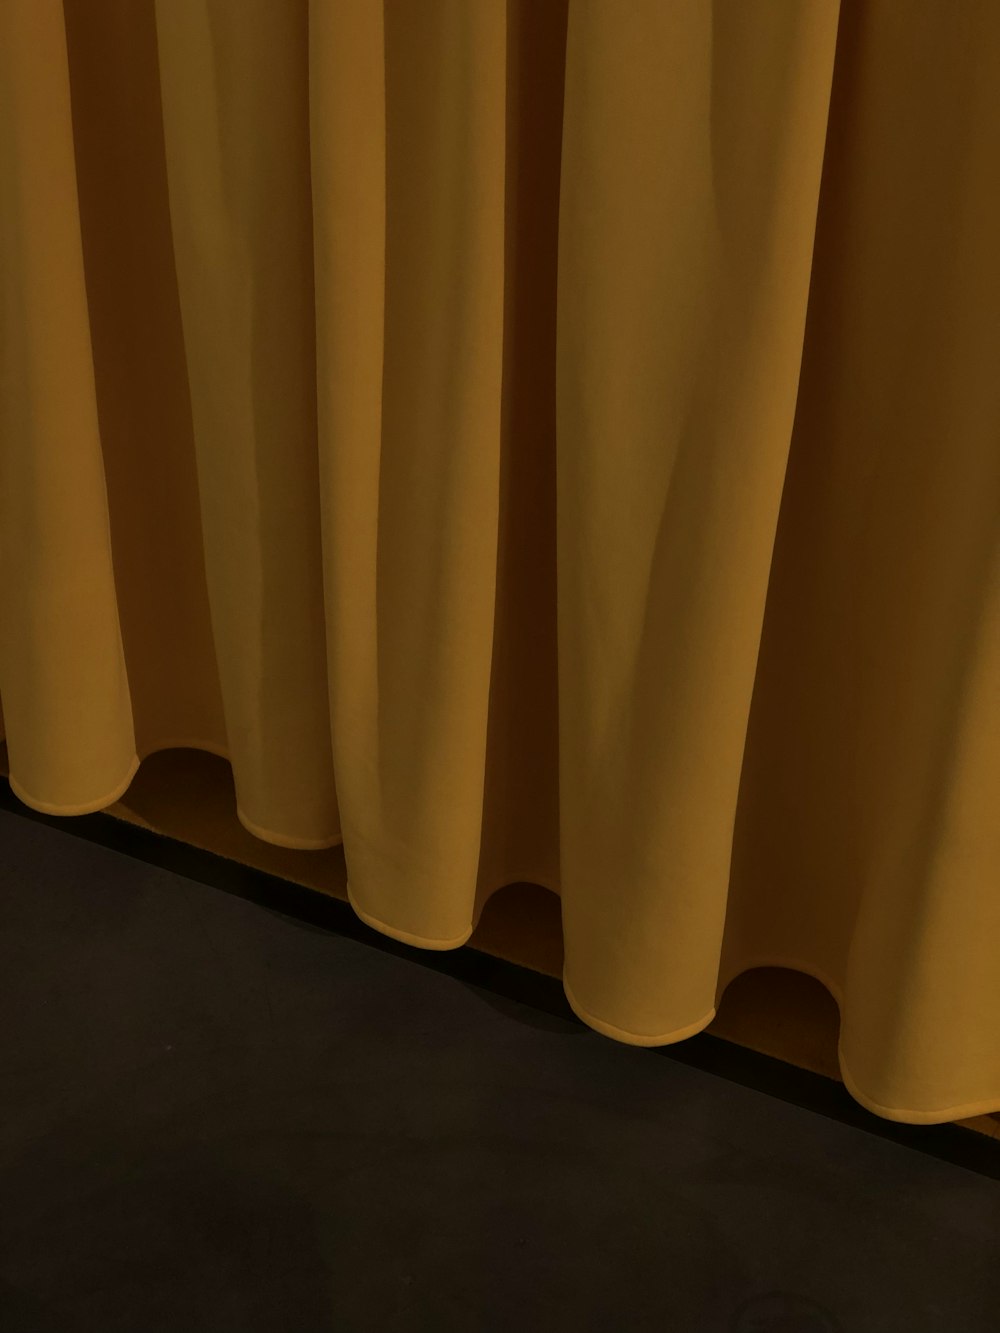 yellow curtain on brown wooden floor